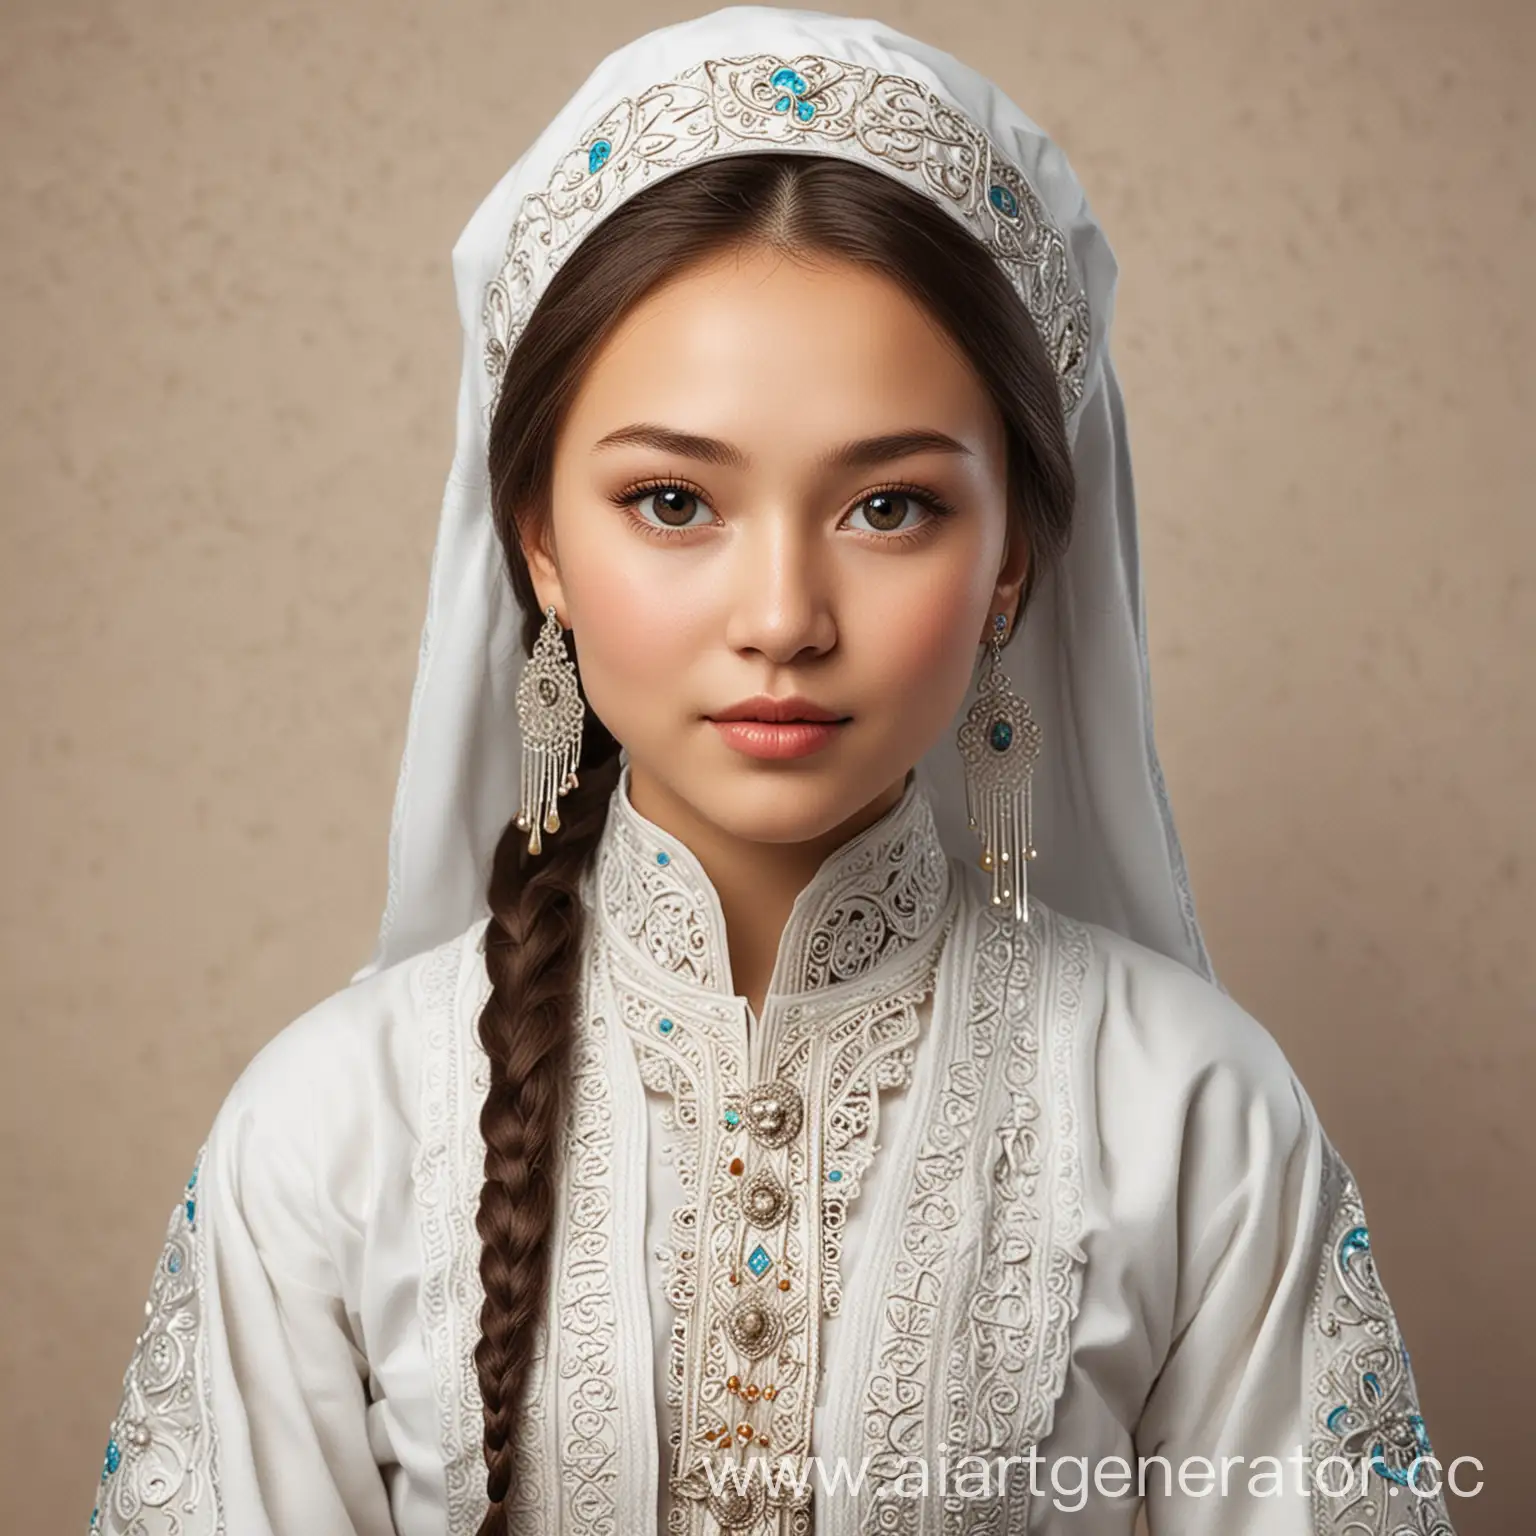 create a portrait of a girl in white national Kazakh clothes for the design of invitations
